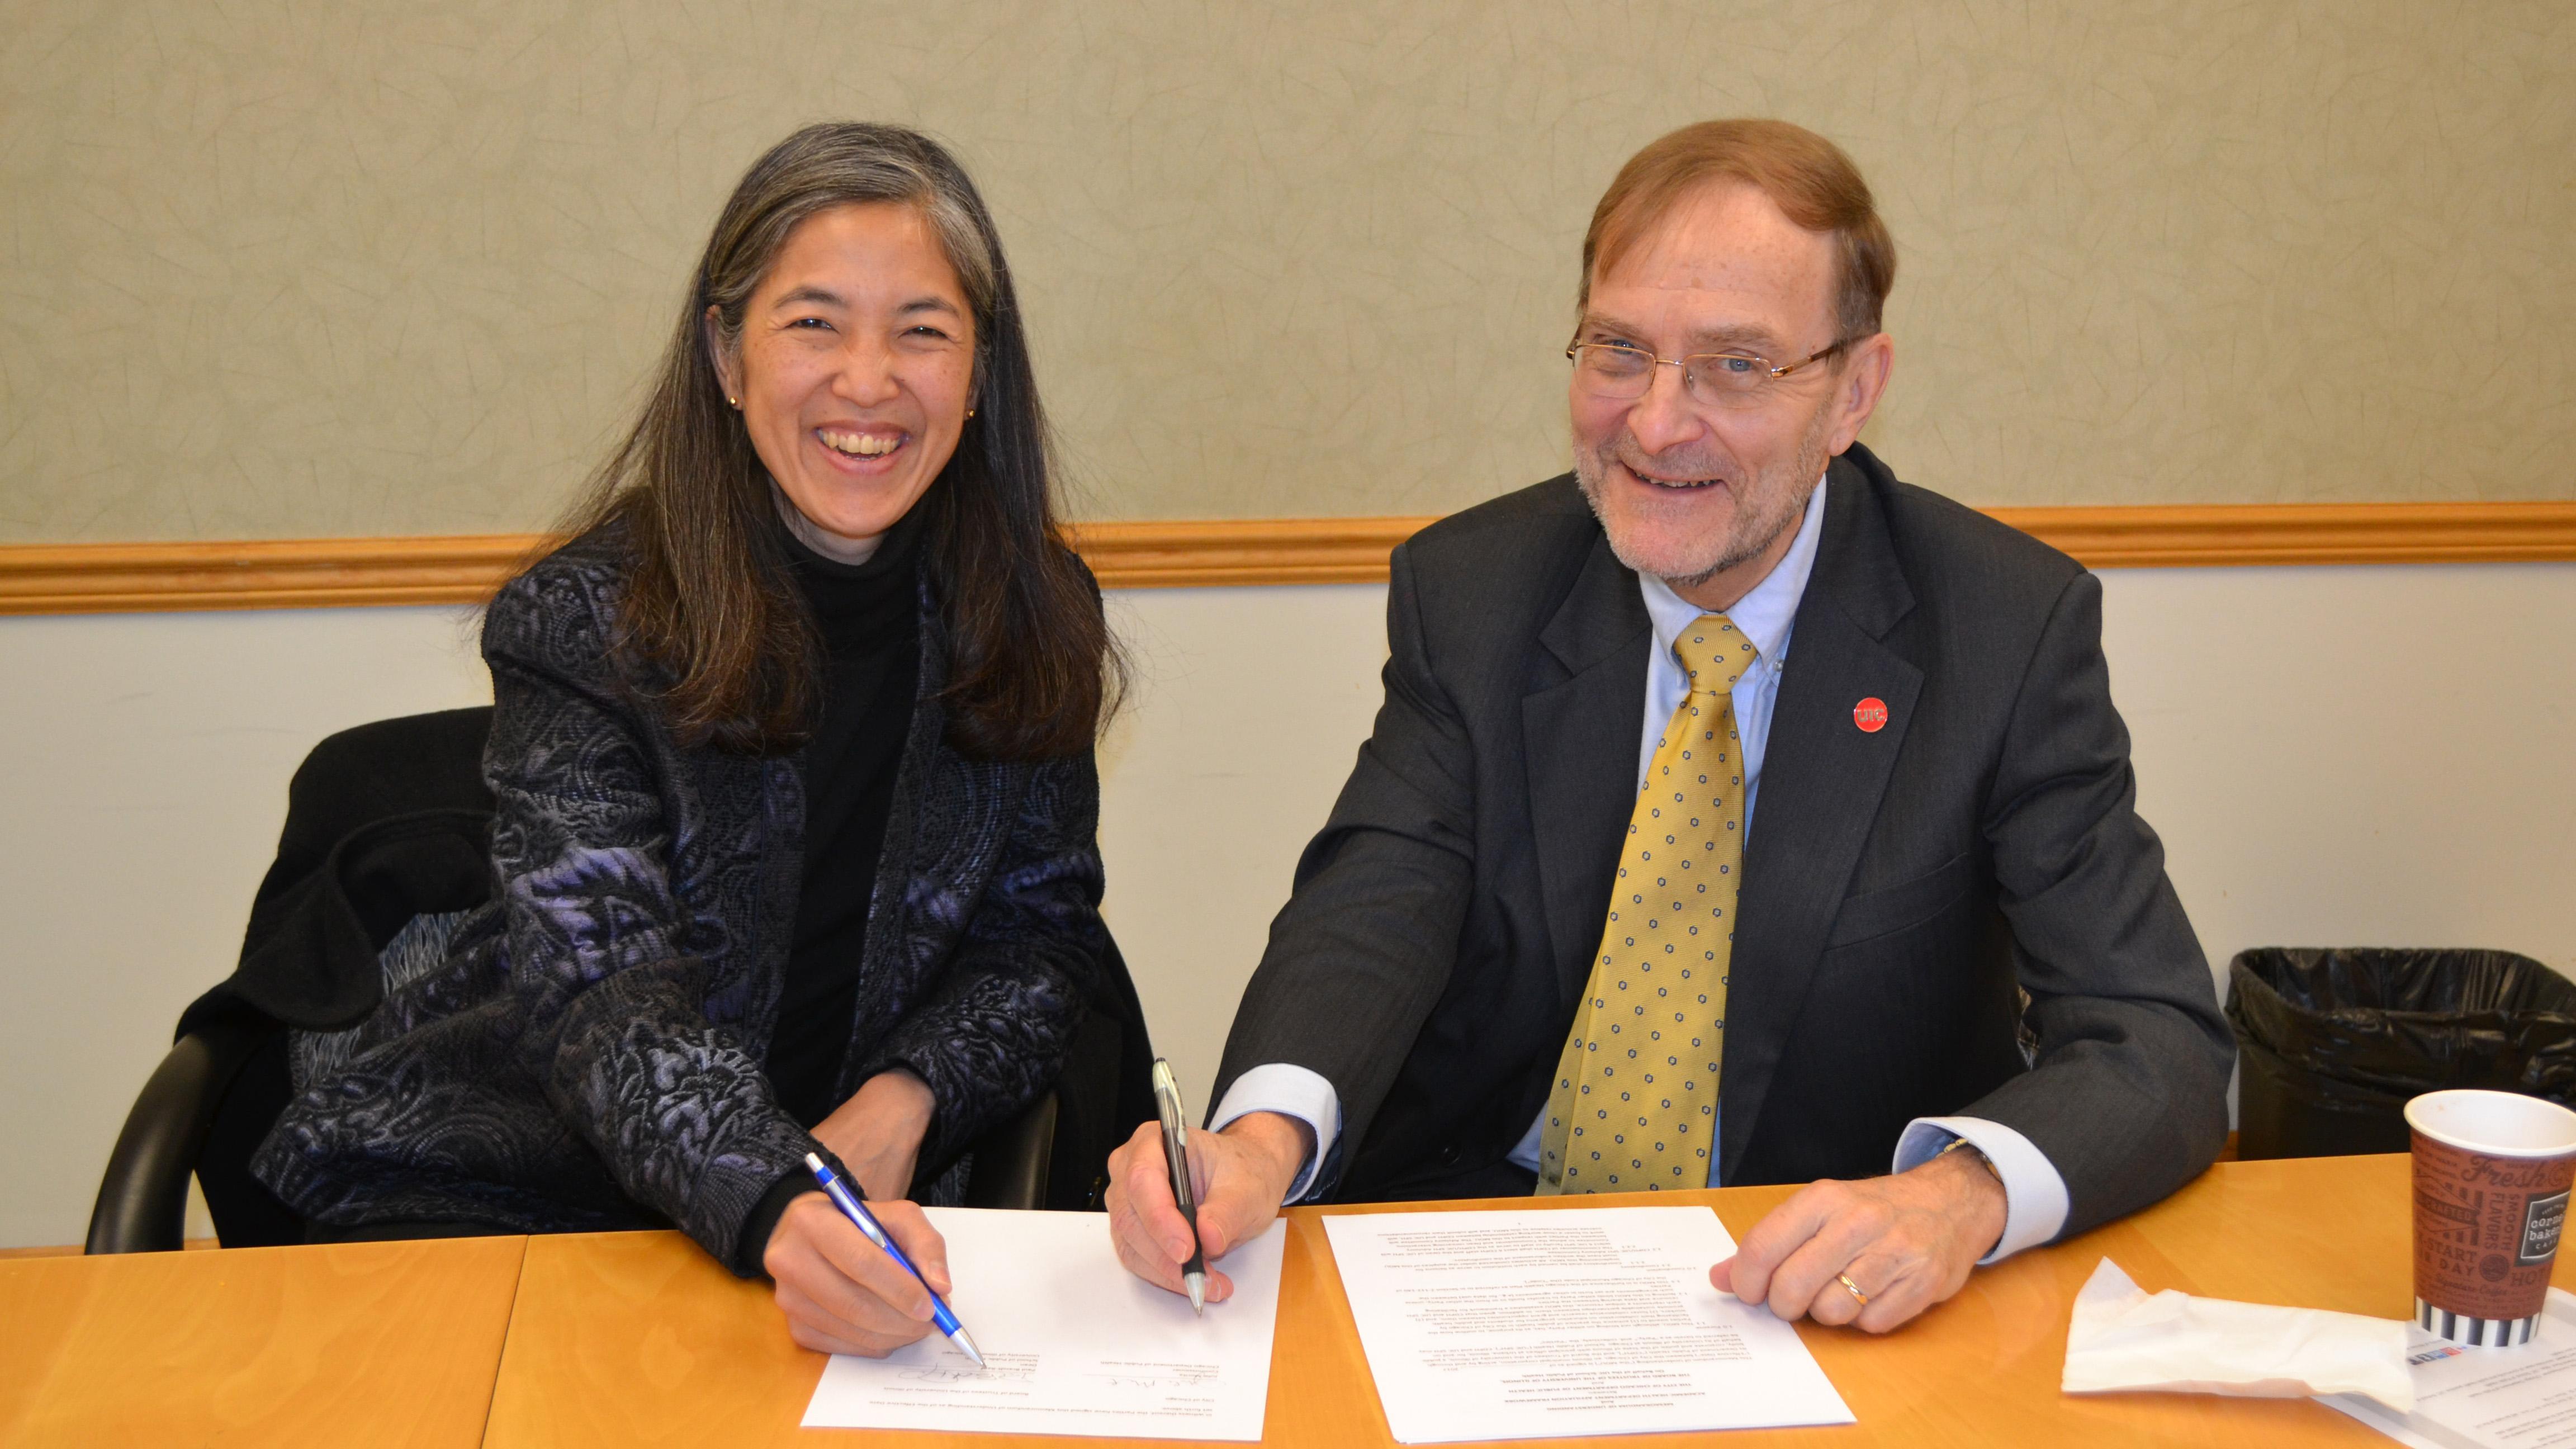 Chicago Department of Public Health Commissioner Dr. Julie Morita and UIC School of Public Health Dean Dr. Paul Brandt-Rauf sign an agreement Wednesday morning formalizing a partnership. (UIC School of Public Health)